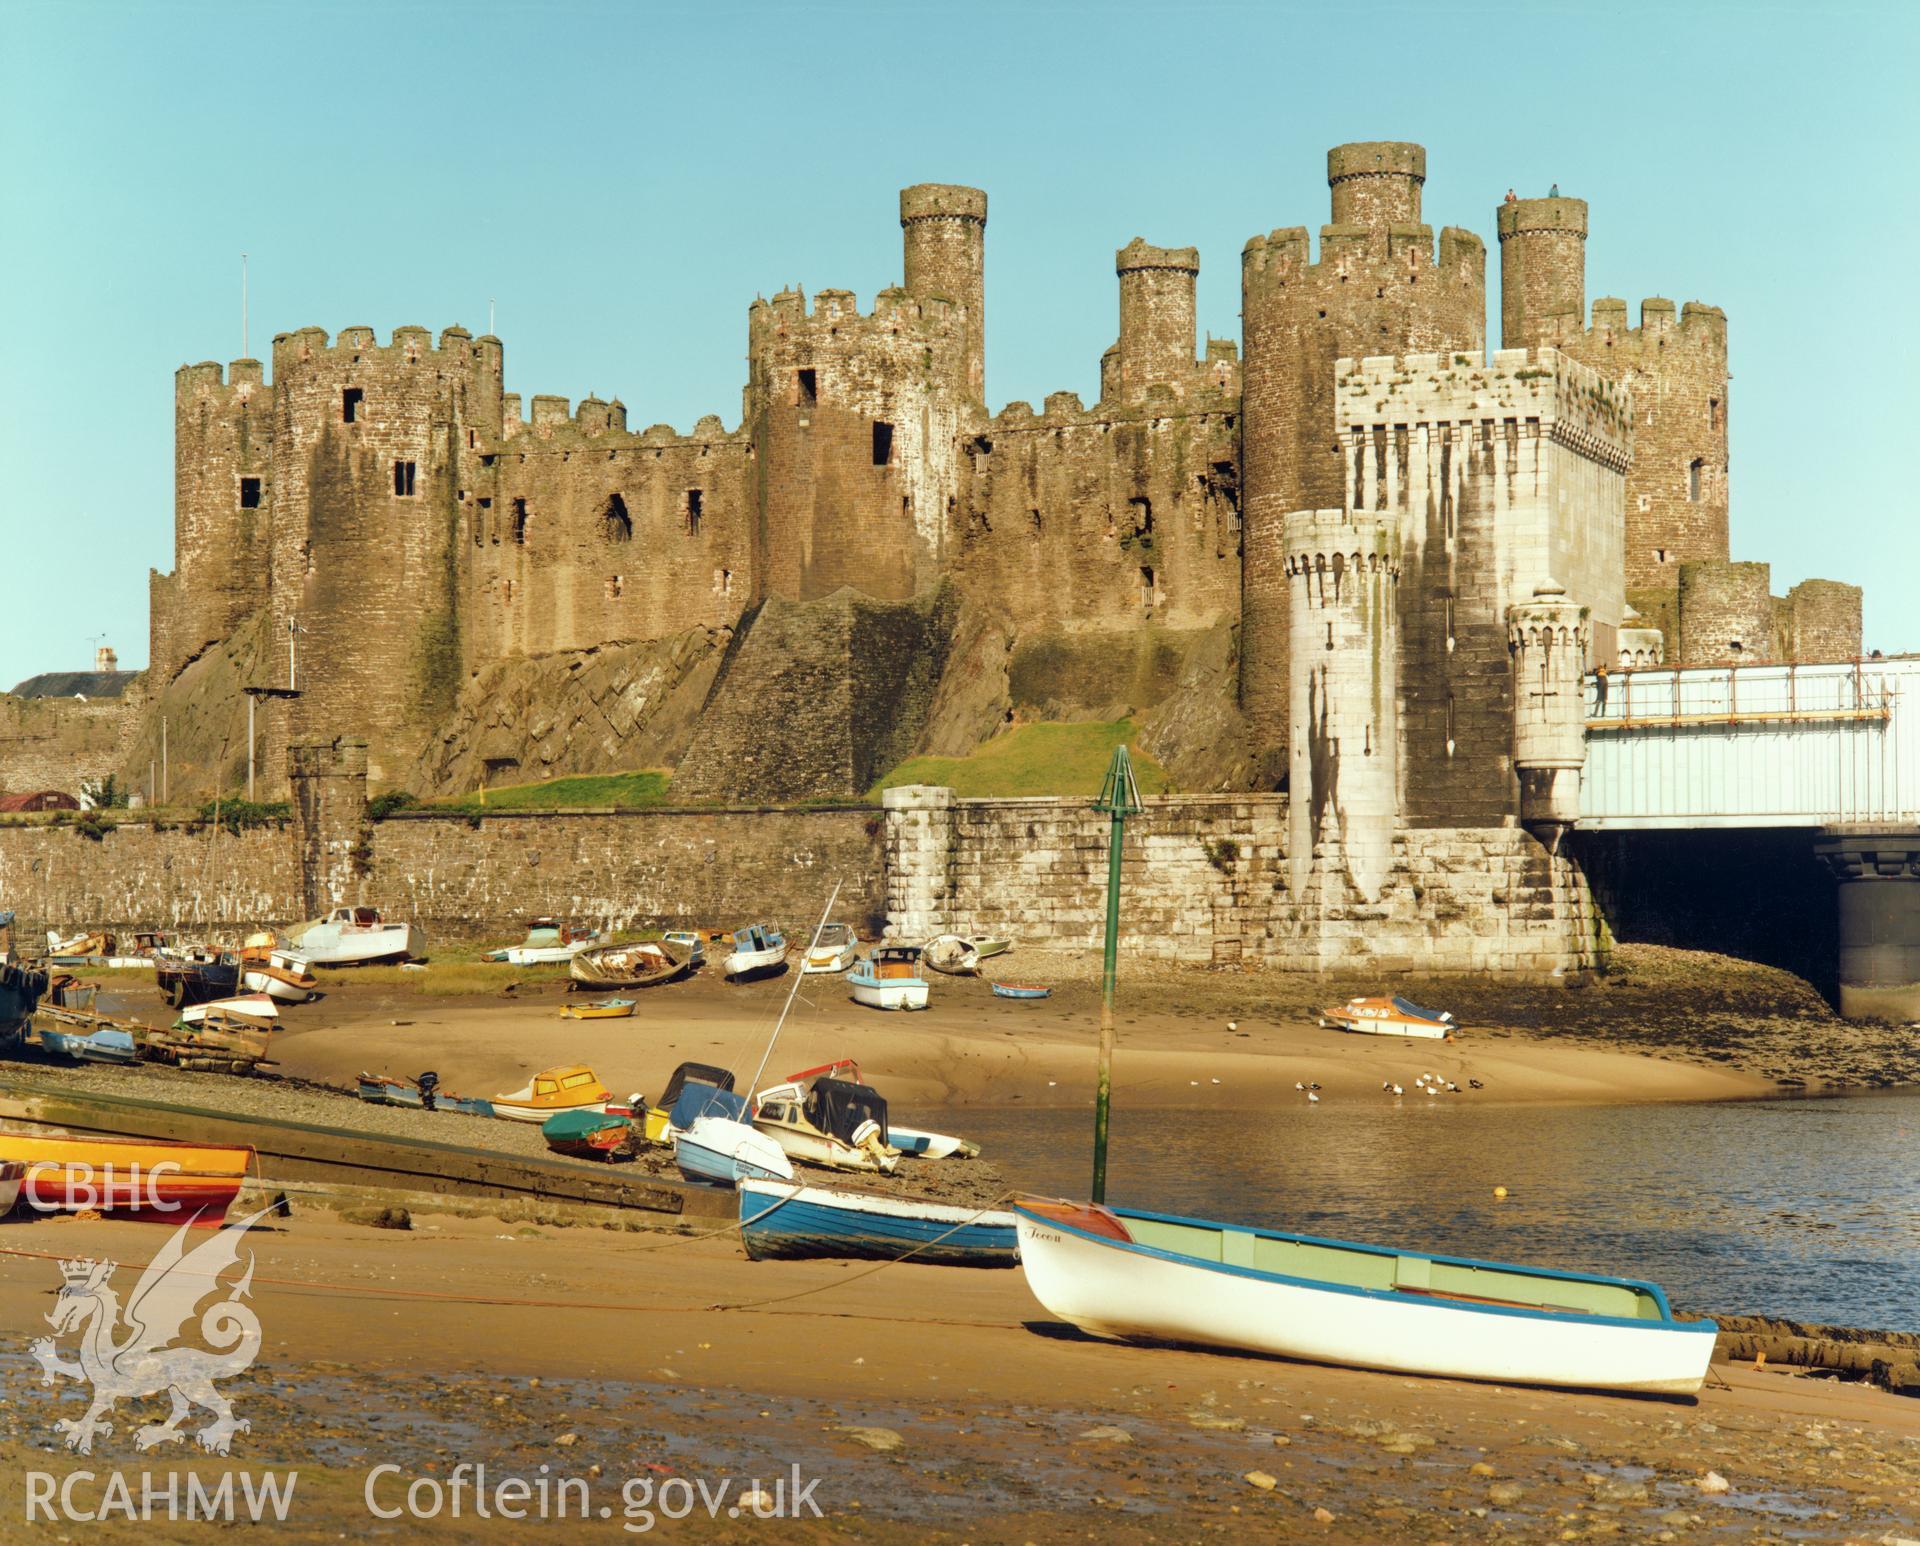 1 colour print showing view of Conwy castle, collated by the former Central Office of Information.